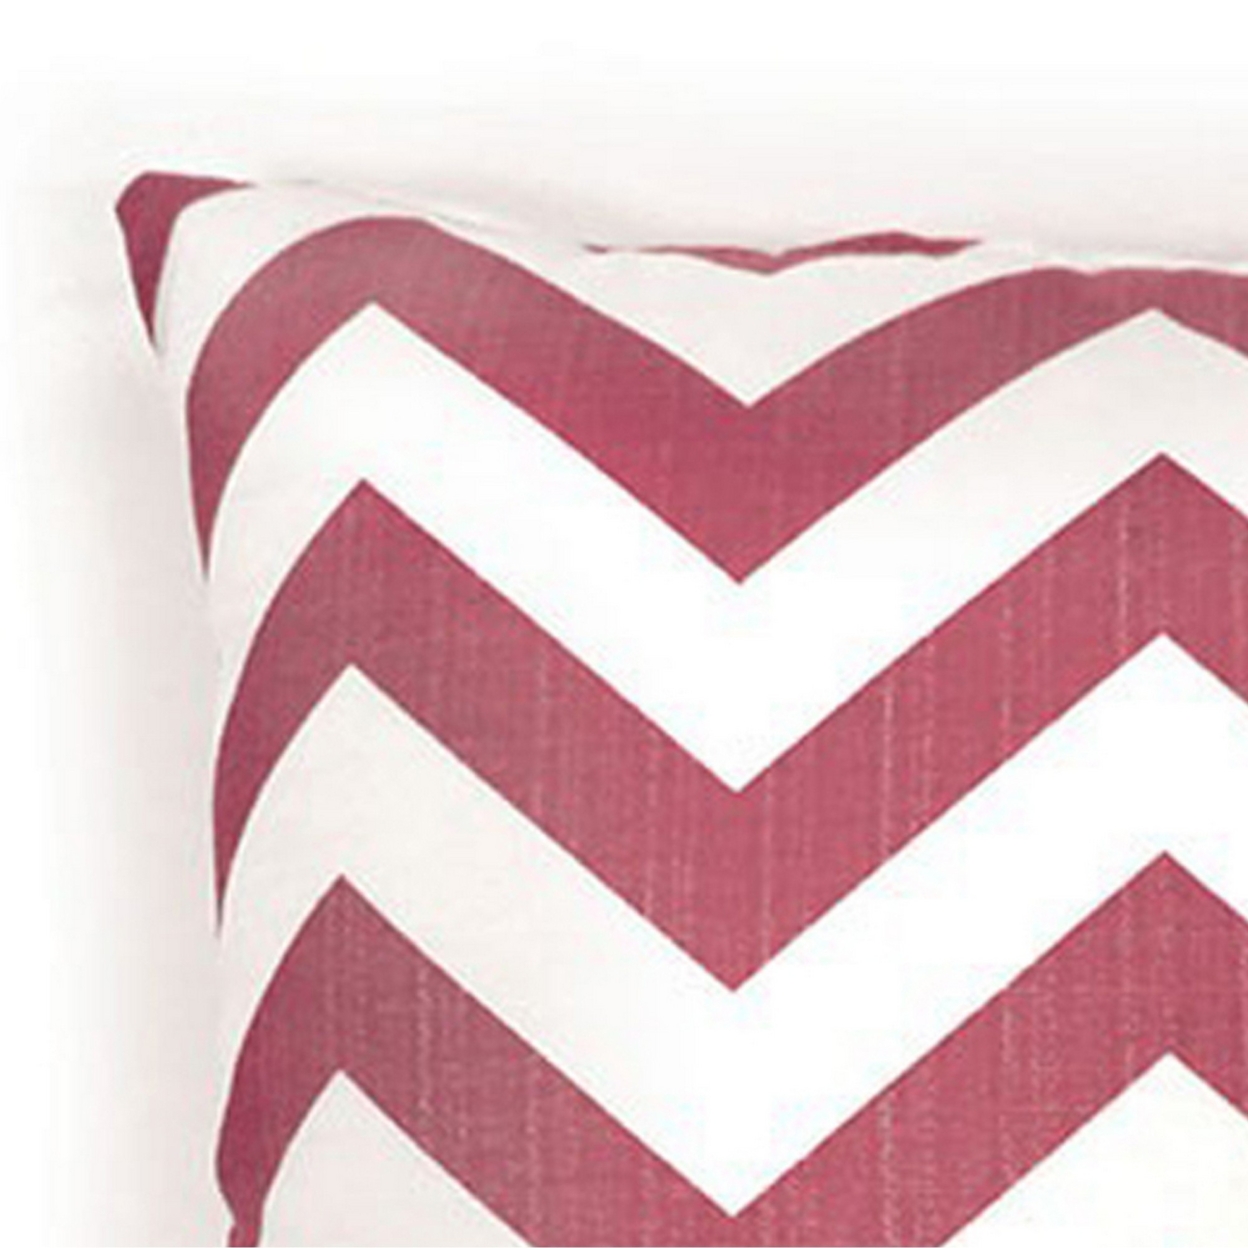 15 Inch Throw Pillow, Classic Chevron Pattern, White, Red